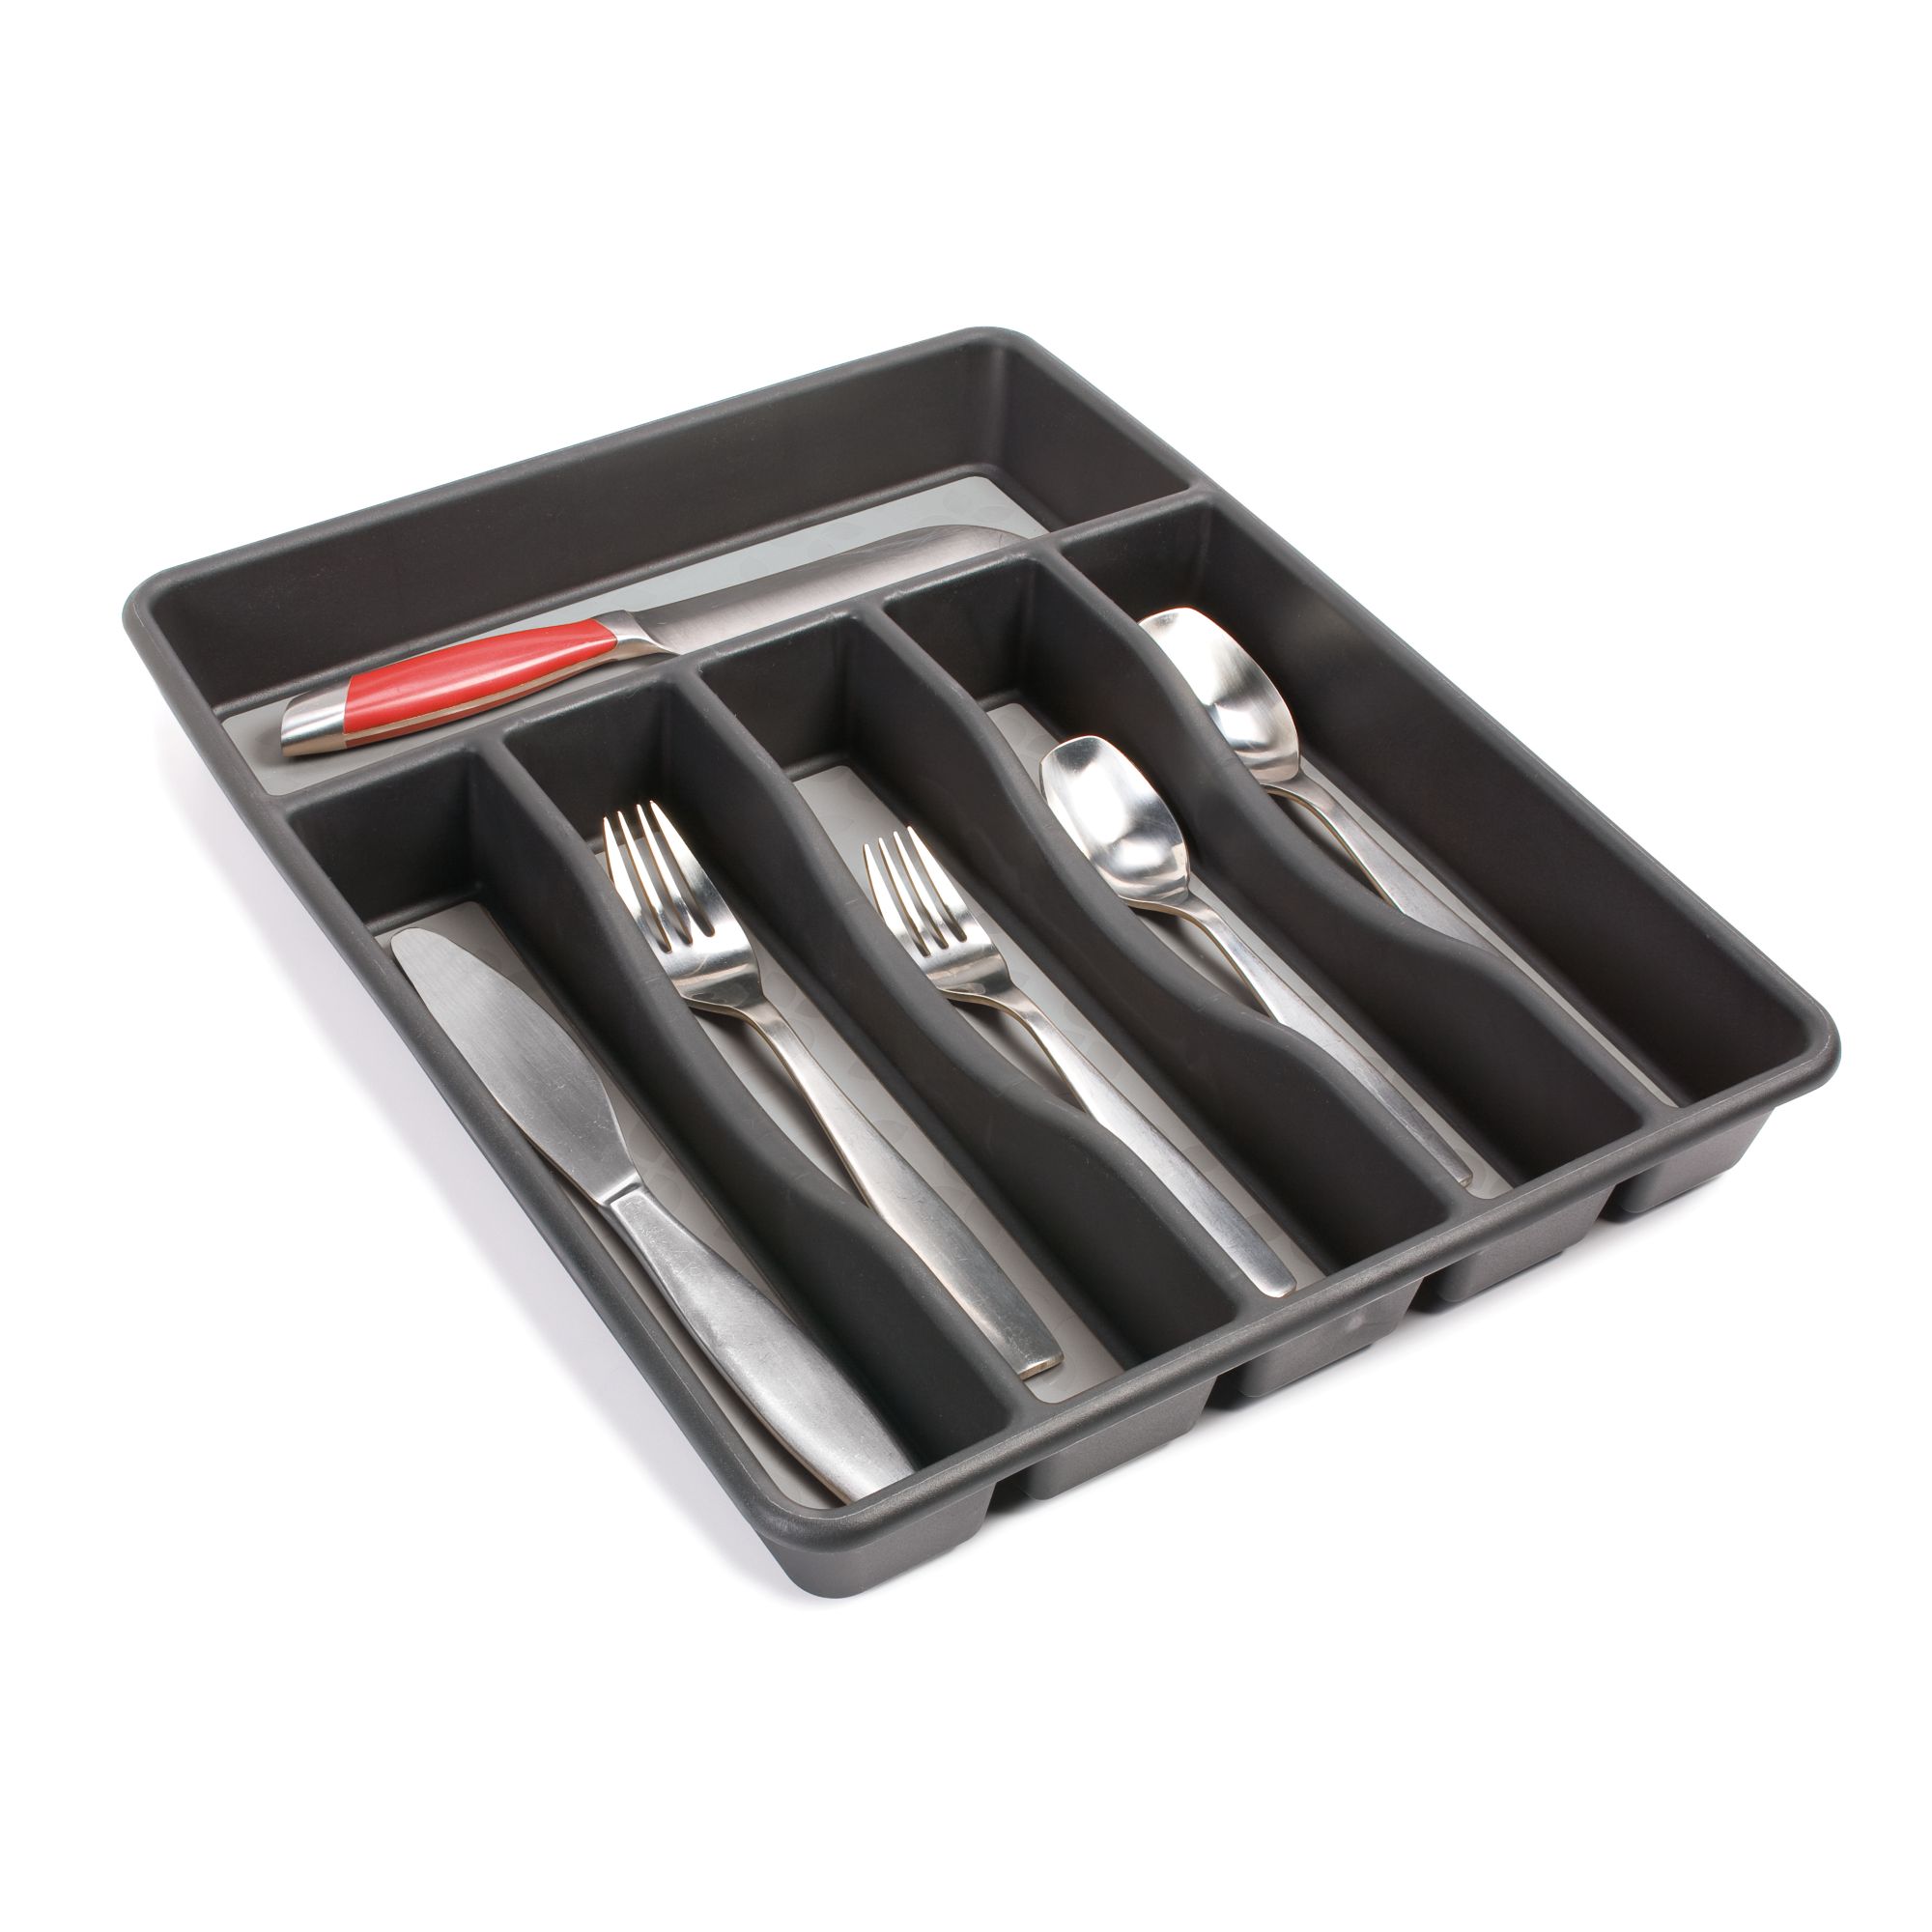 Flatware Drawer Organizer - Slip Resistant Kitchen Tray with 6 Sections to  Neatly Arrange Cutlery and Serving Utensils. Also Great to Keep Your Desk  Drawer and Office Supplies Well Organized (Black) 